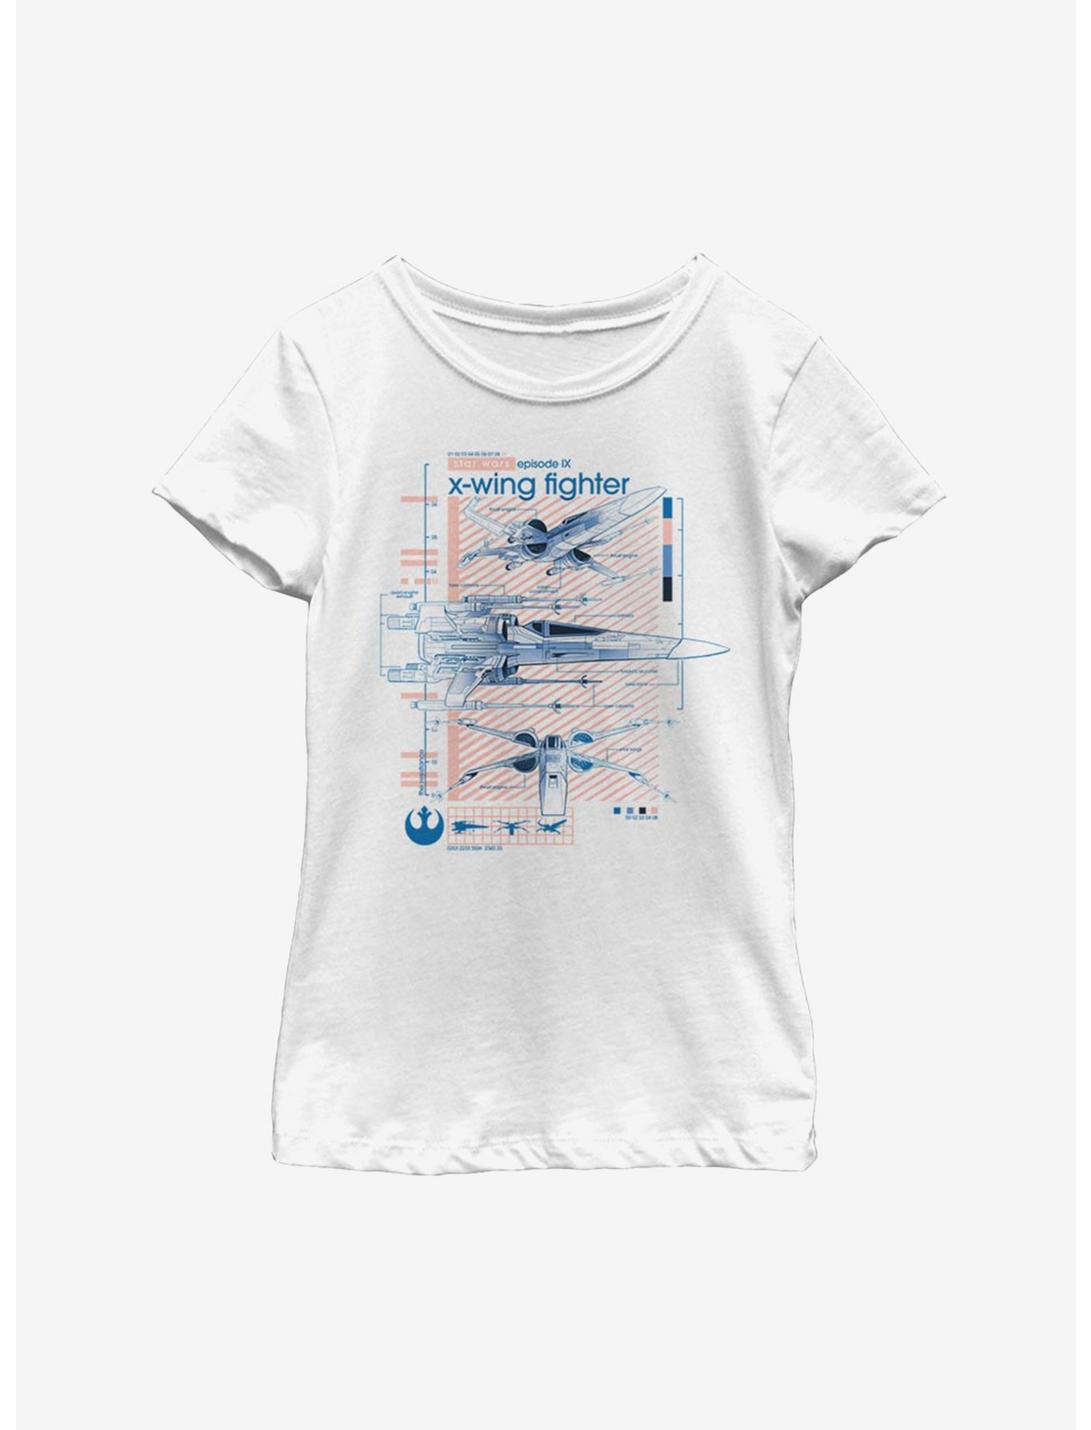 Star Wars Episode IX The Rise Of Skywalker X-Wing Fighters Ninety Youth Girls T-Shirt, WHITE, hi-res